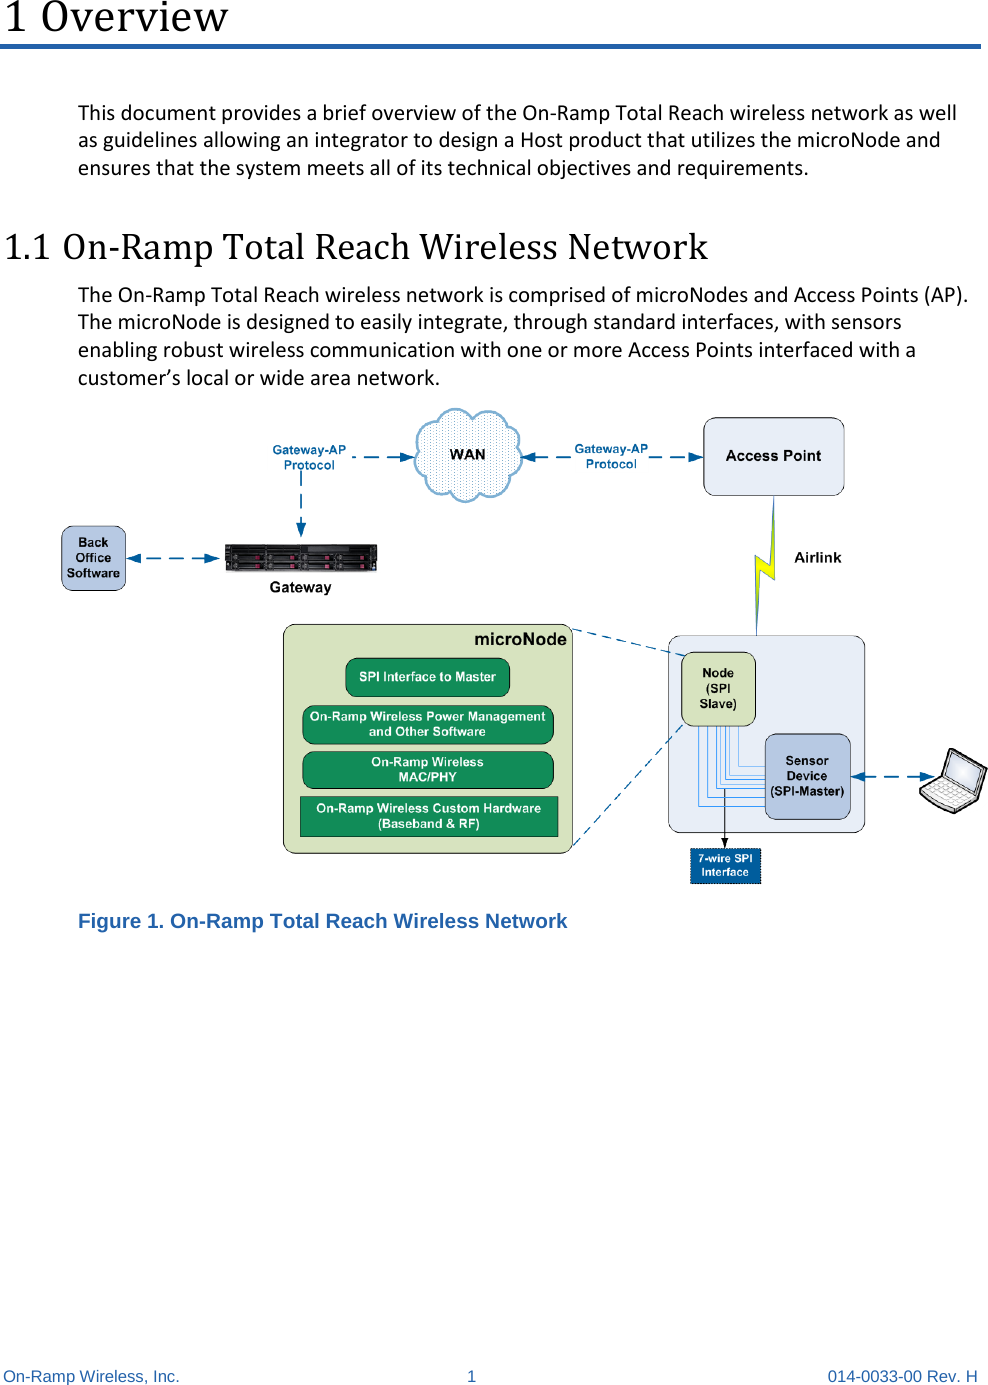  On-Ramp Wireless, Inc.  1  014-0033-00 Rev. H 1 Overview This document provides a brief overview of the On-Ramp Total Reach wireless network as well as guidelines allowing an integrator to design a Host product that utilizes the microNode and ensures that the system meets all of its technical objectives and requirements. 1.1 On-Ramp Total Reach Wireless Network The On-Ramp Total Reach wireless network is comprised of microNodes and Access Points (AP). The microNode is designed to easily integrate, through standard interfaces, with sensors enabling robust wireless communication with one or more Access Points interfaced with a customer’s local or wide area network.    Figure 1. On-Ramp Total Reach Wireless Network 